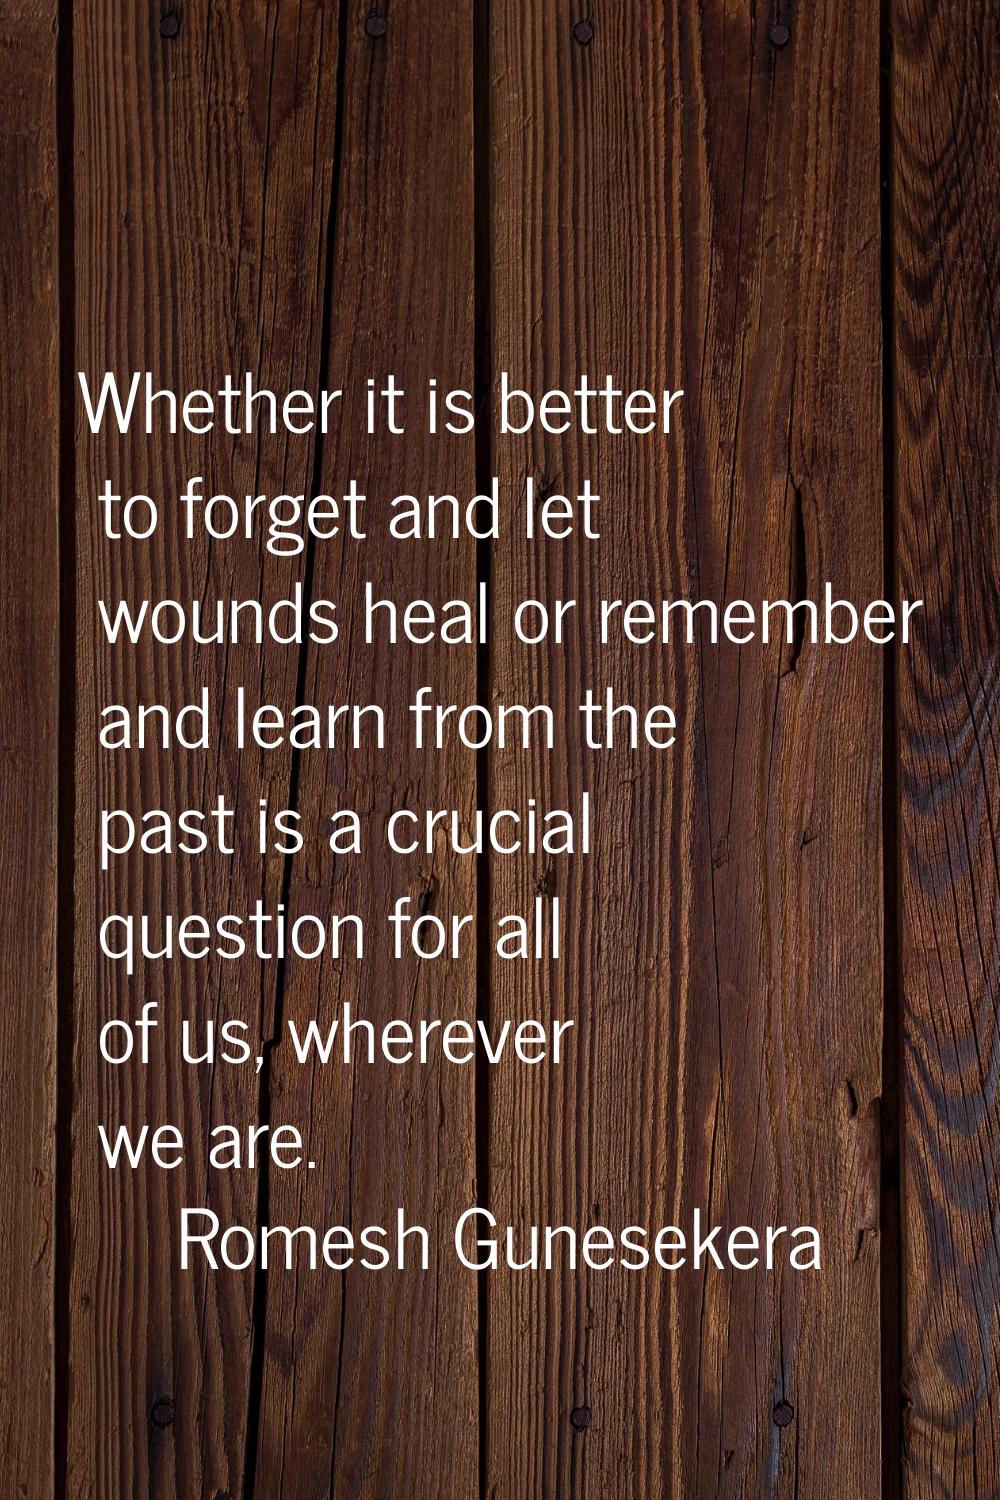 Whether it is better to forget and let wounds heal or remember and learn from the past is a crucial